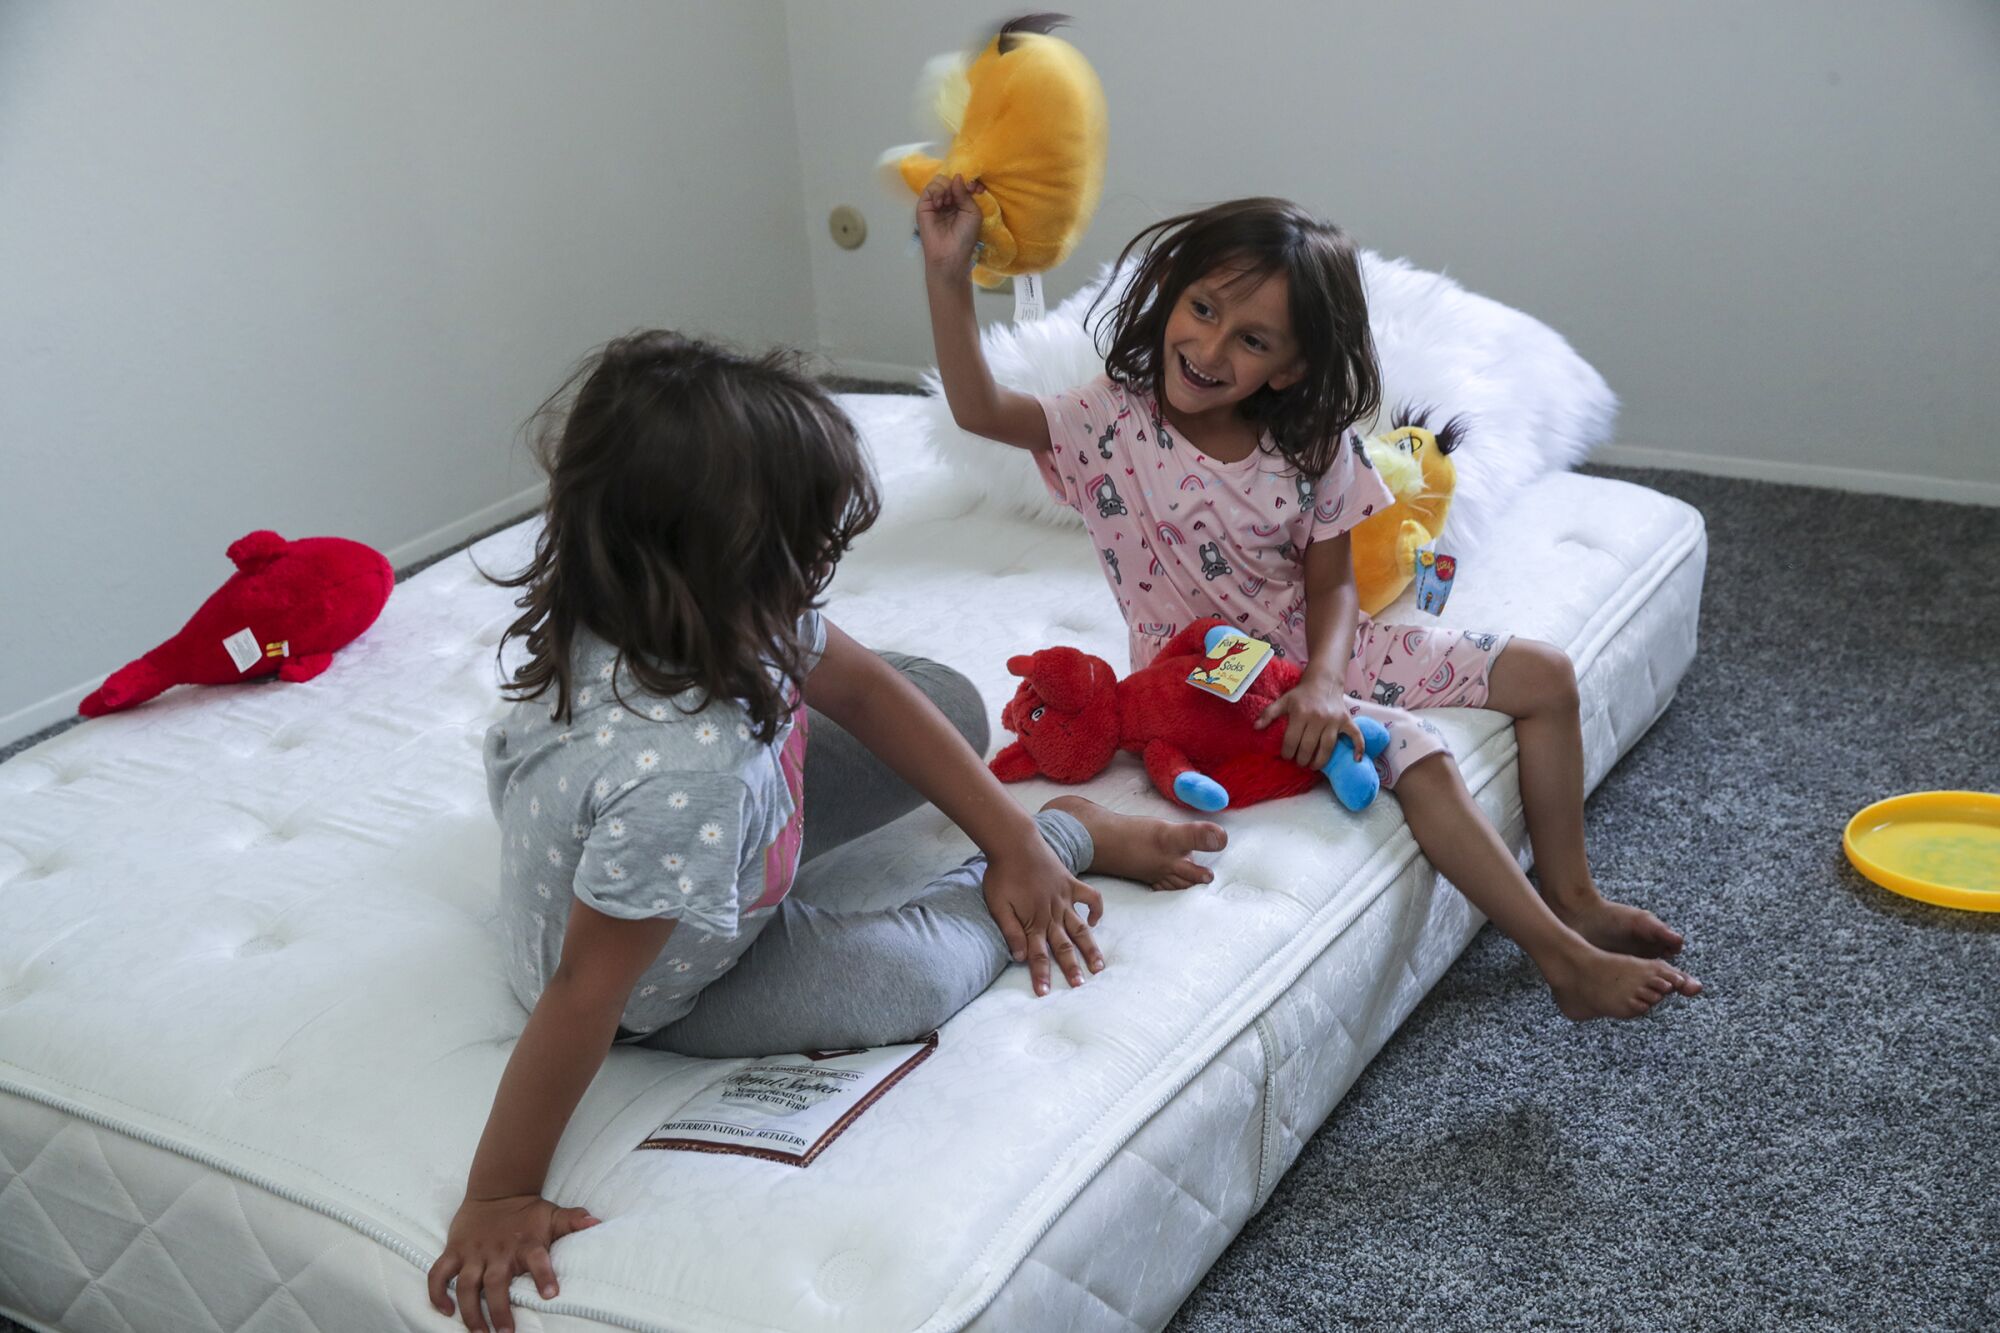 Afghan refugees Gulsom Sadat, 9, left, and her sister, Aqsa Sadat, 6, play on a mattress in their apartment in El Cajon.